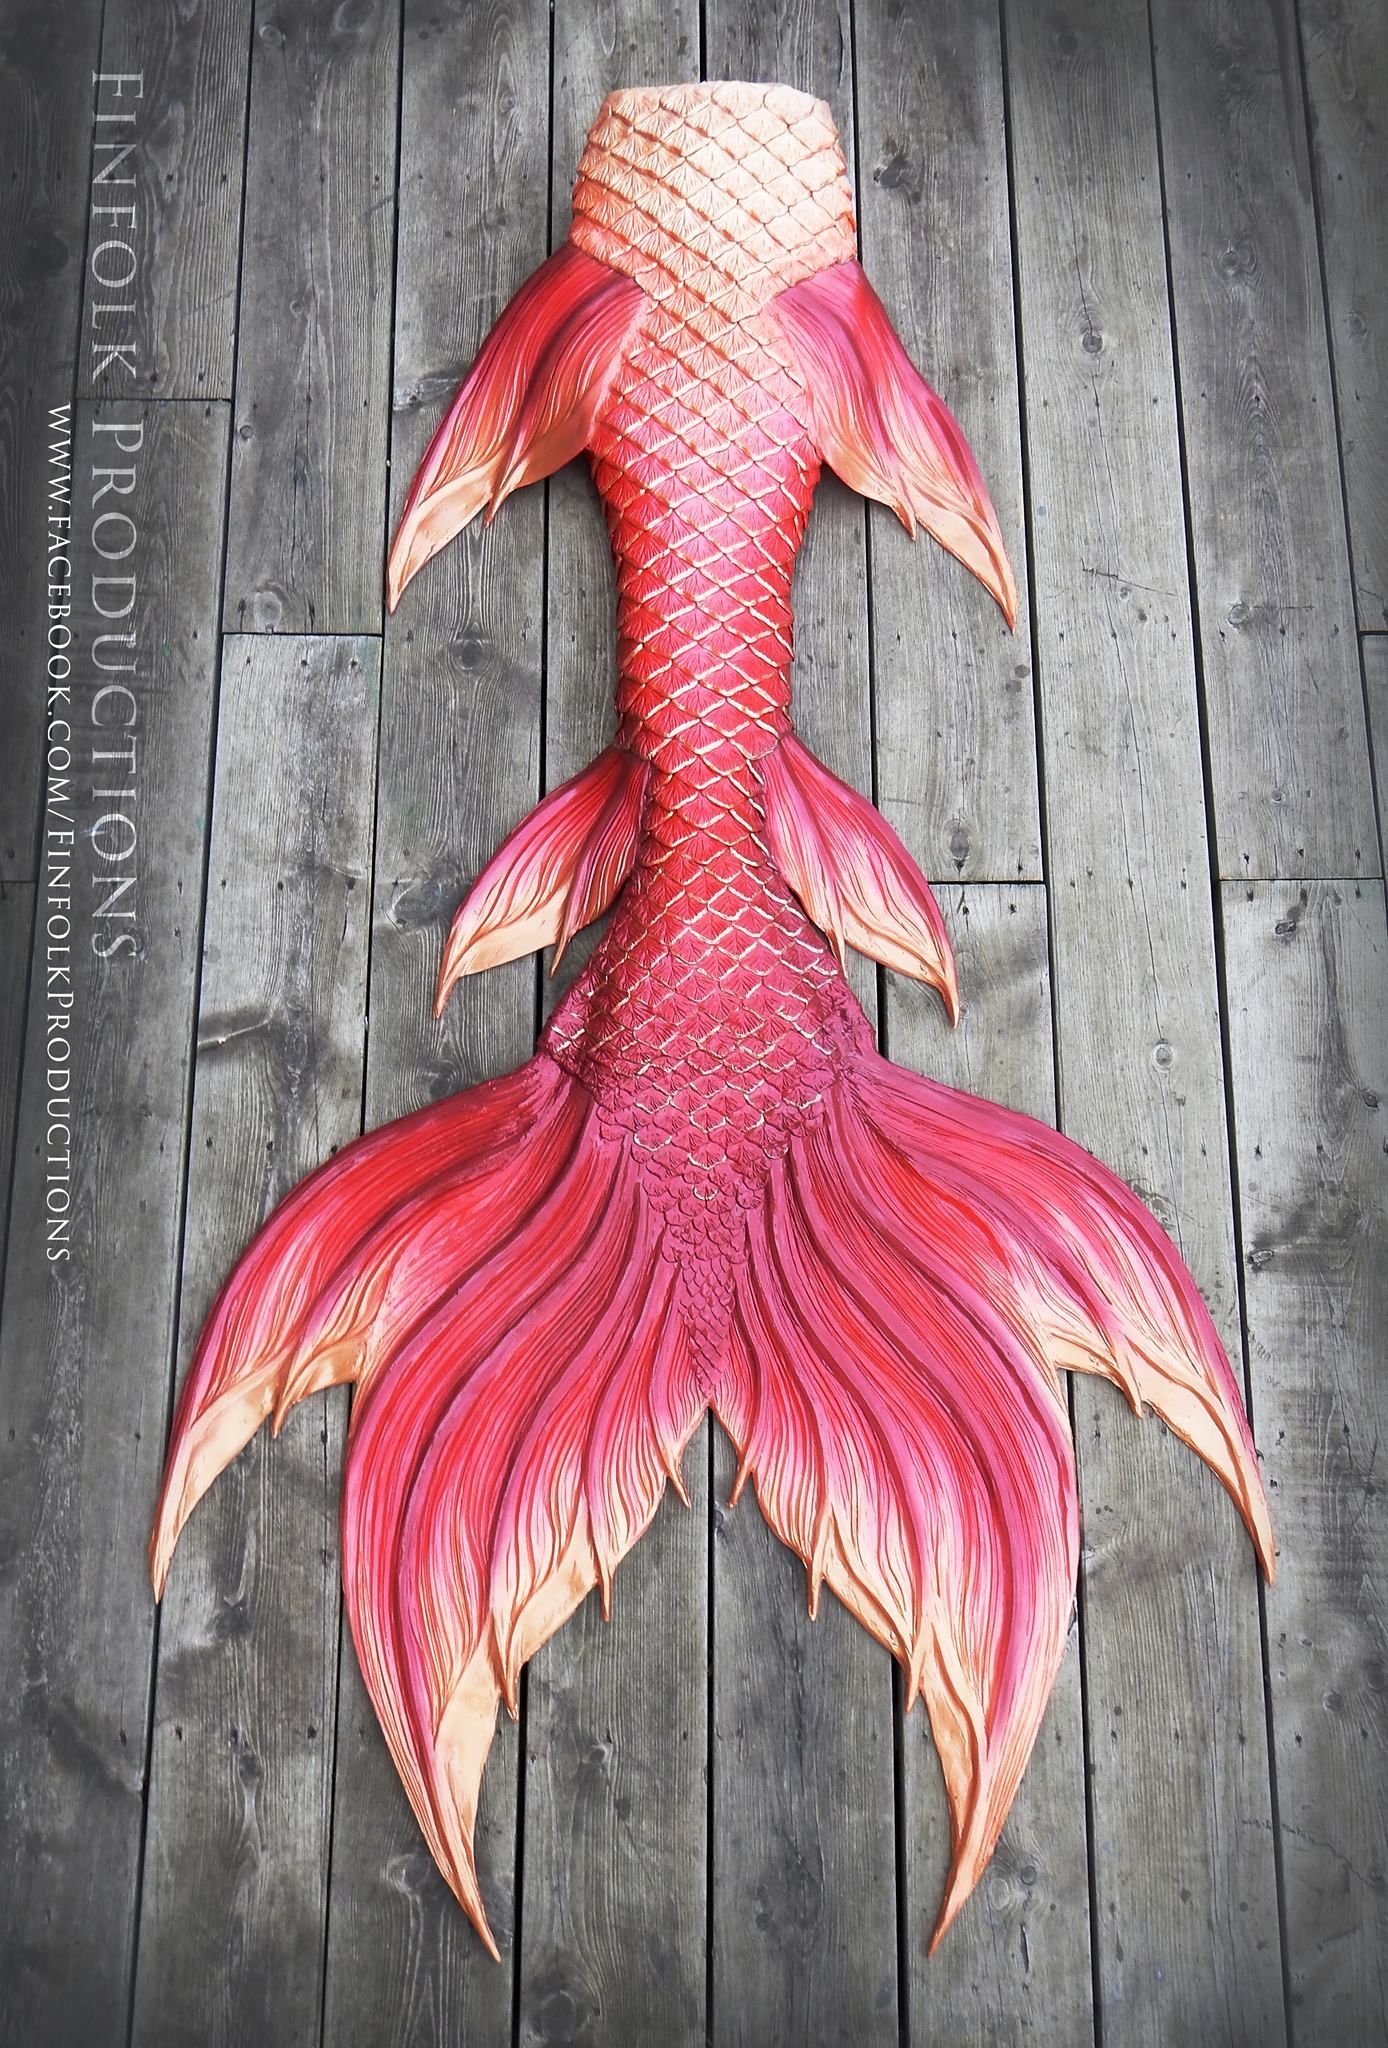 Full Silicone Mermaid Tail by Finfolk Productions.